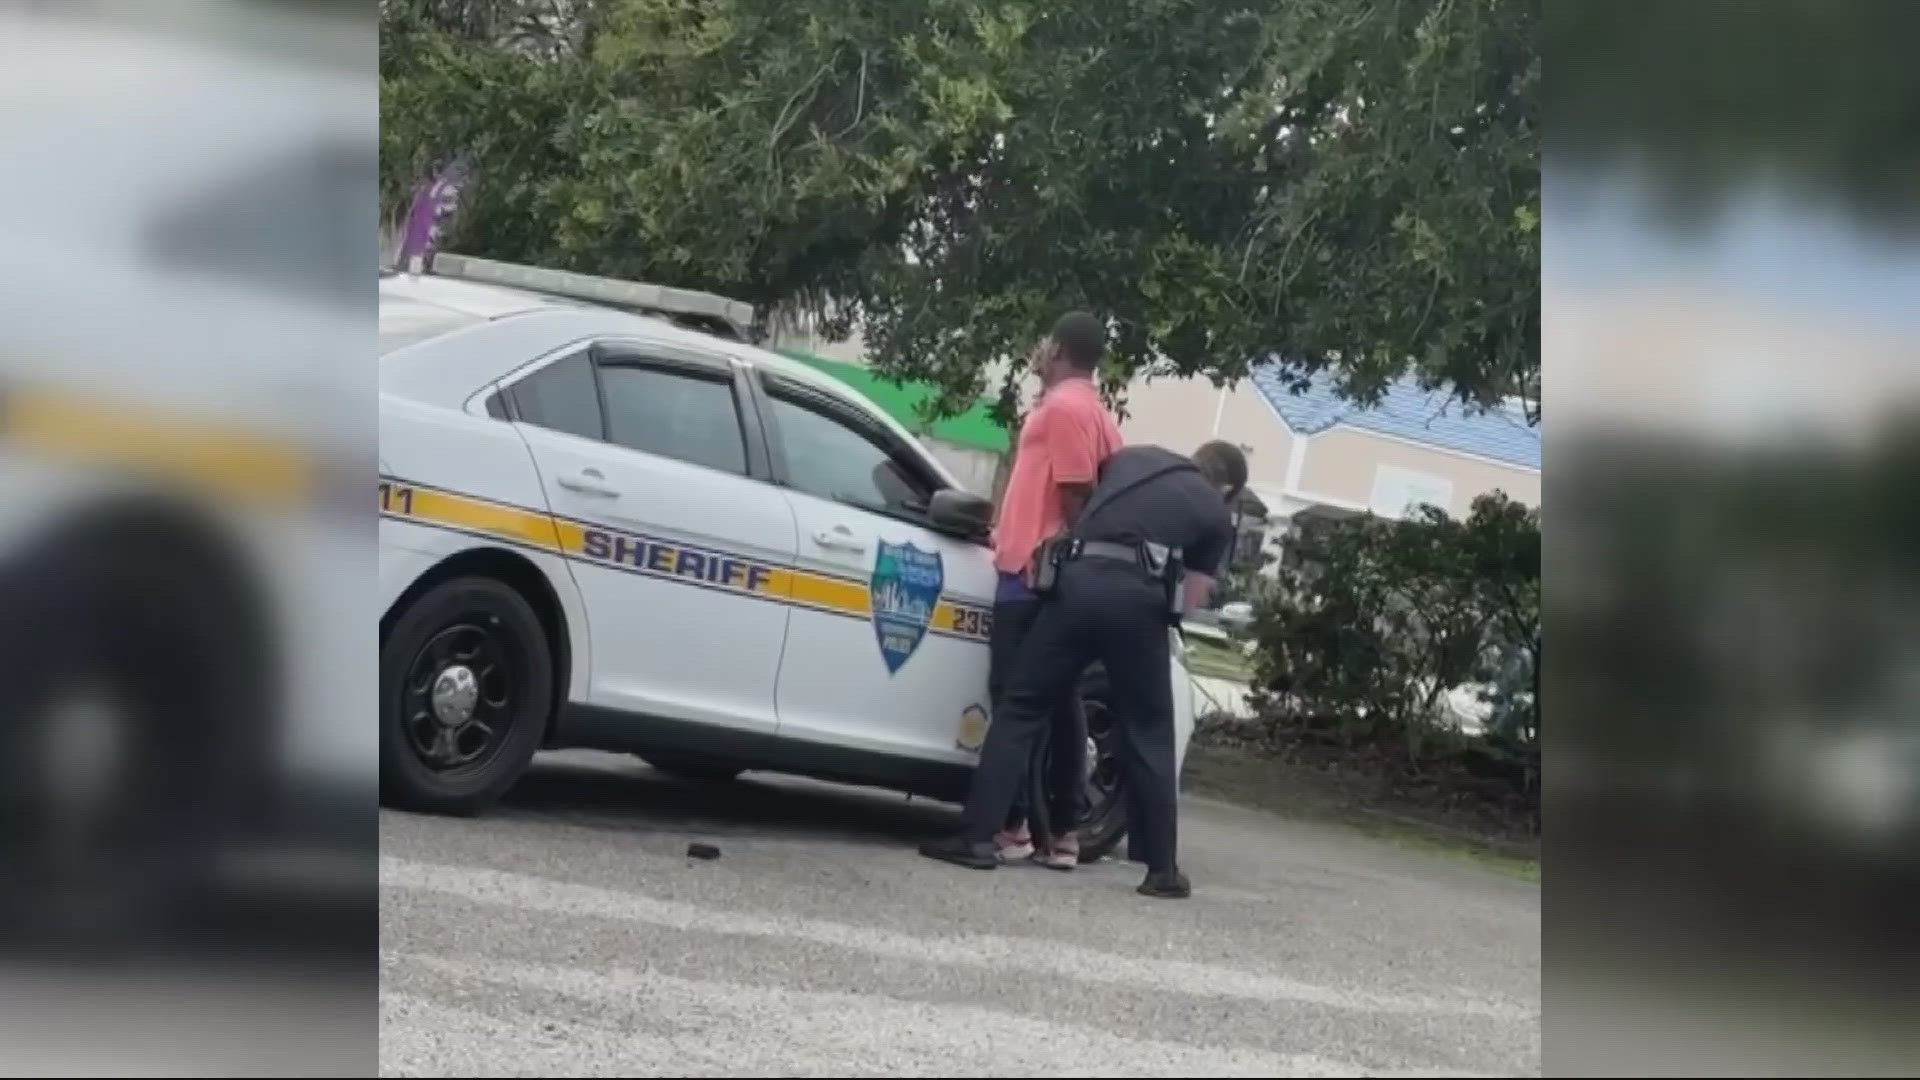 JSO says officers were called to the area of Bell Tower Court Monday in response to a domestic call between a woman and her boyfriend.